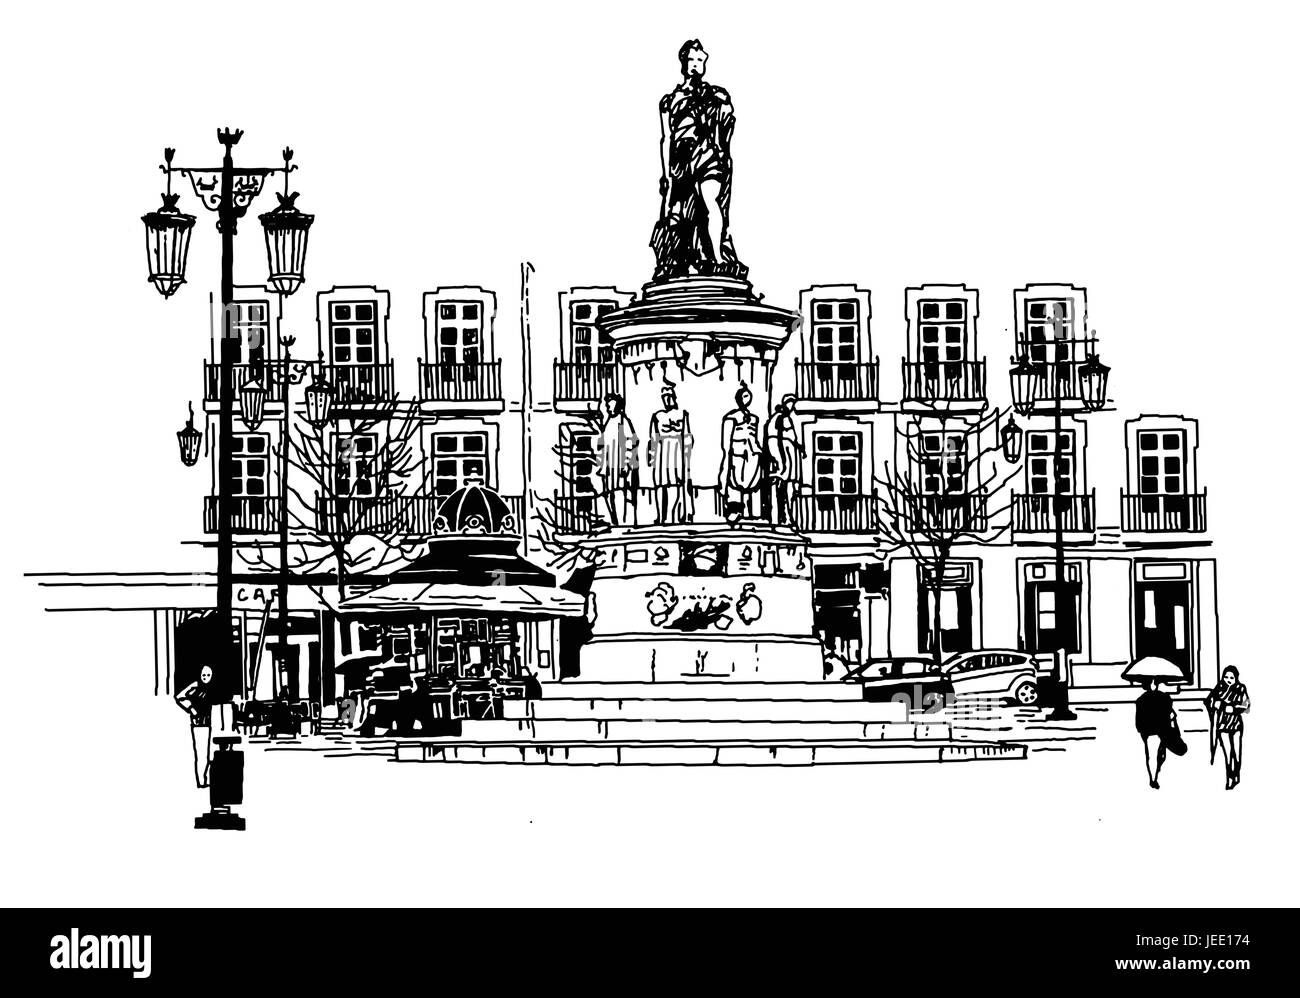 Camoes square in lisbon - vector illustration Stock Vector